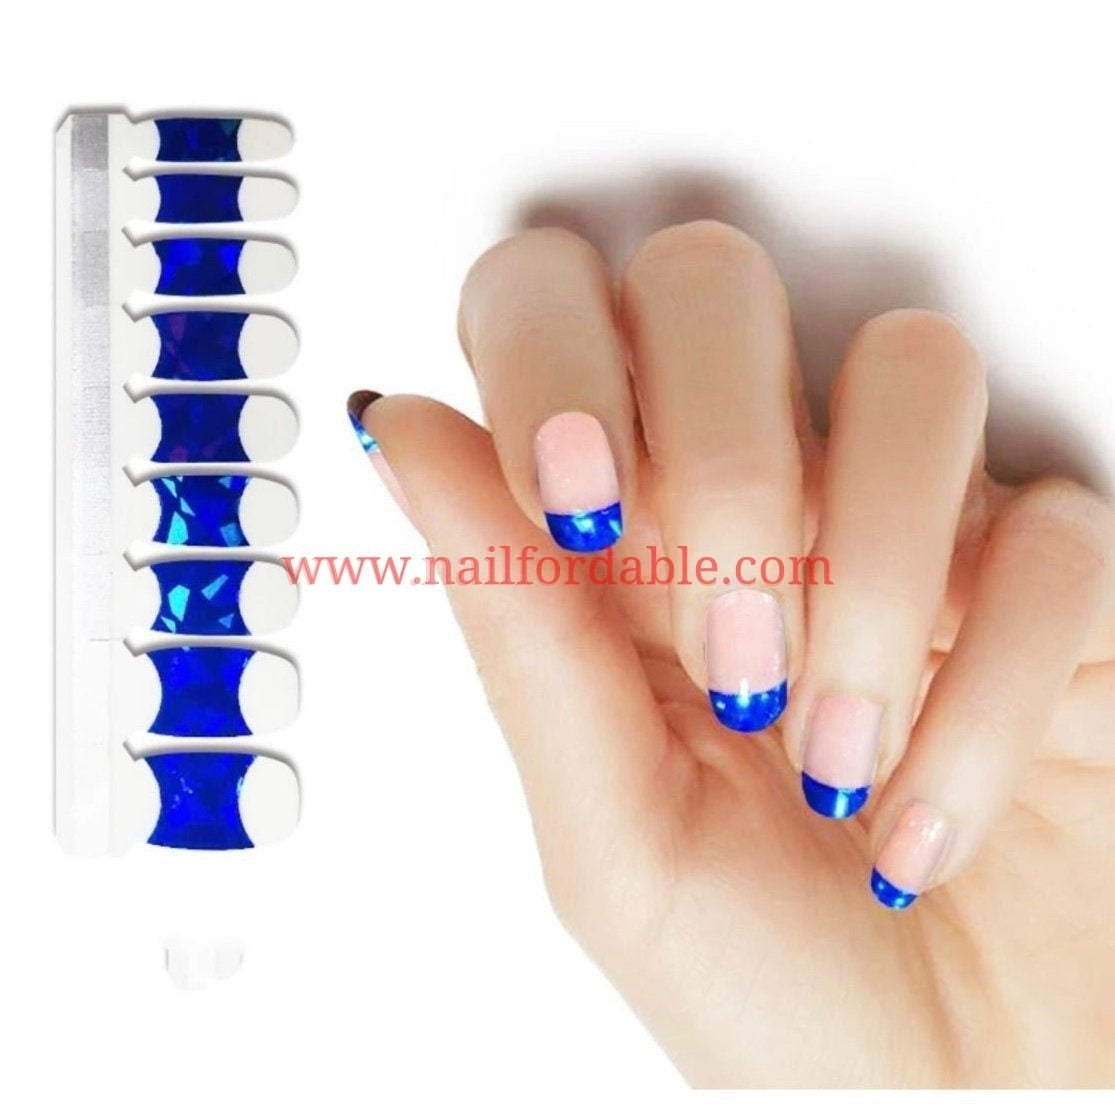 Blue French tips Chrome Nail Wraps | Semi Cured Gel Wraps | Gel Nail Wraps |Nail Polish | Nail Stickers